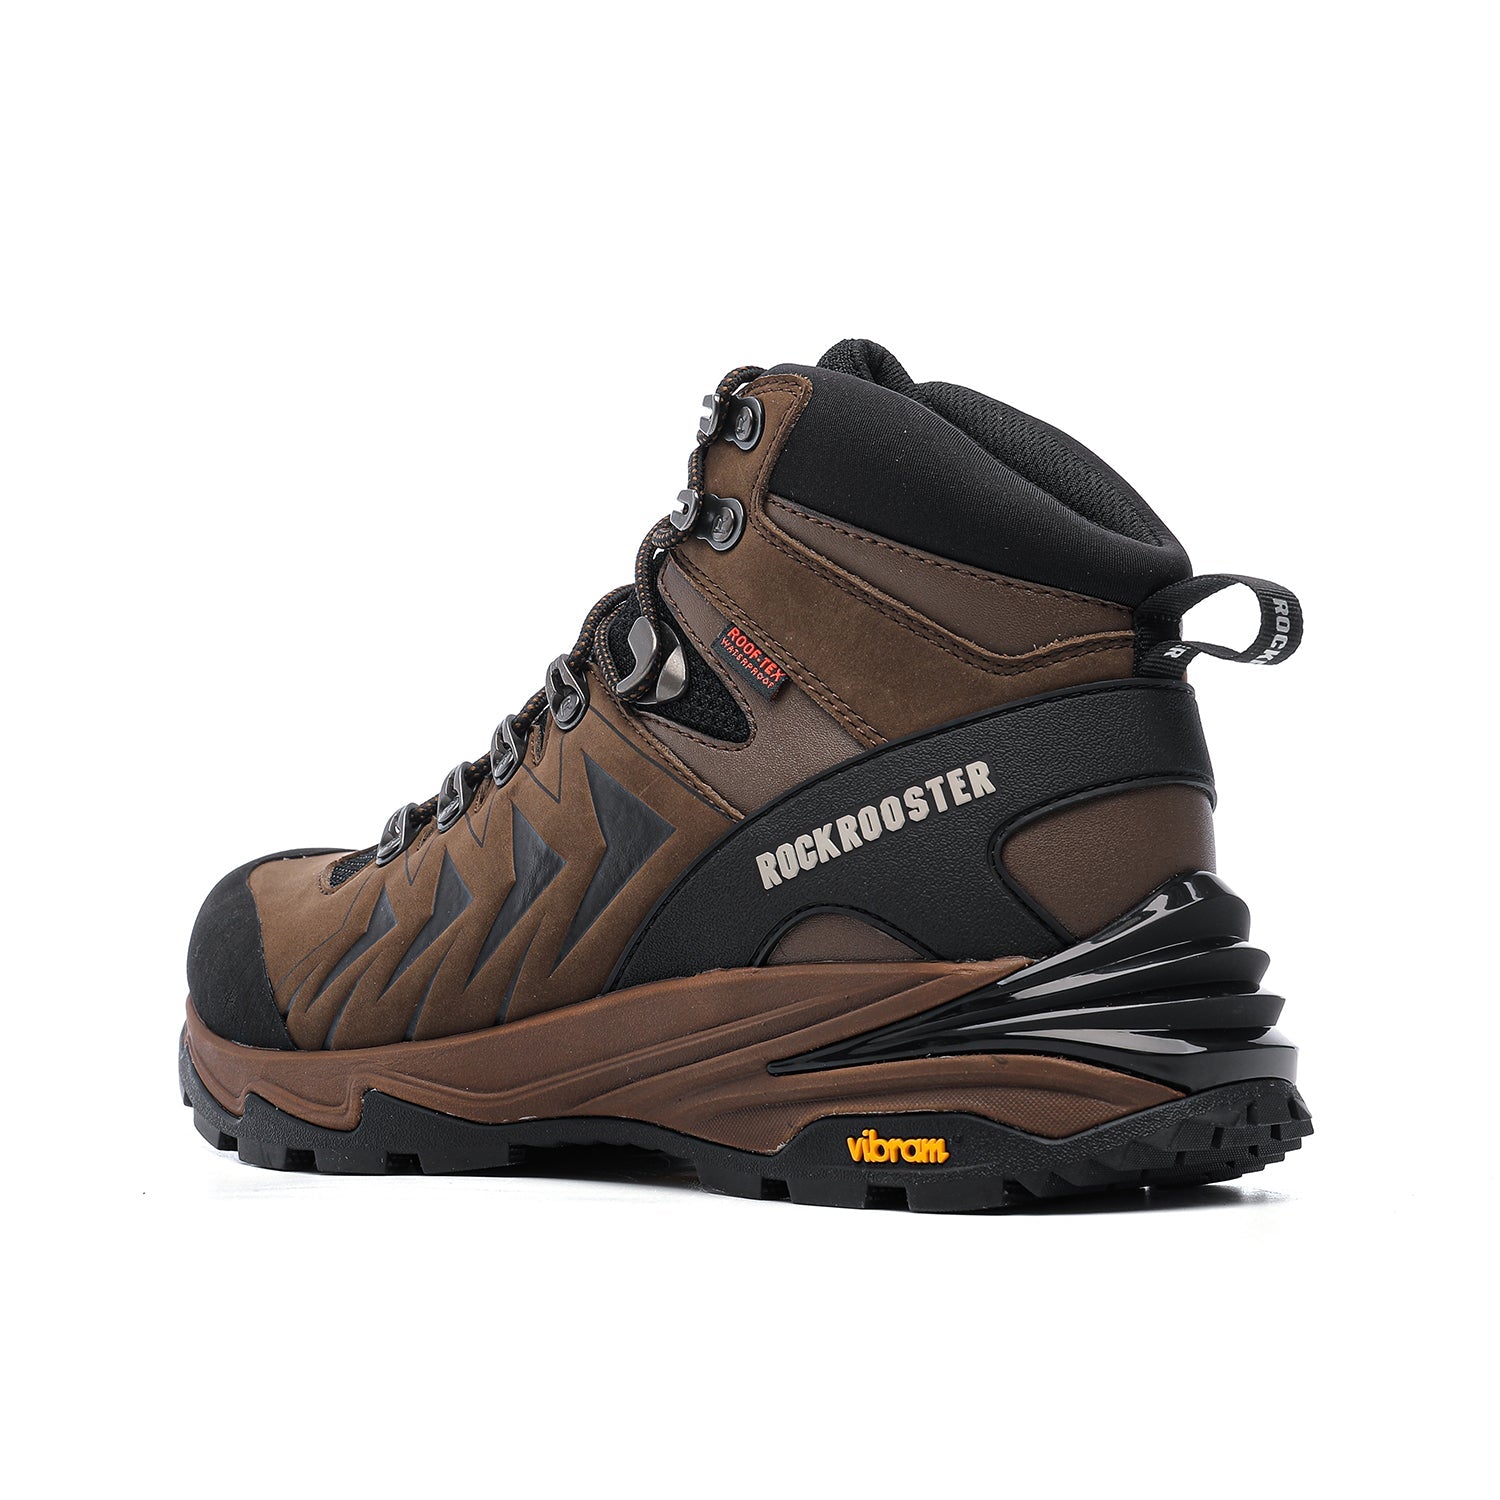 ROCKROOSTER Williamsburg Brown 6 Inch Waterproof Hiking Boots with - Mercantile Mountain